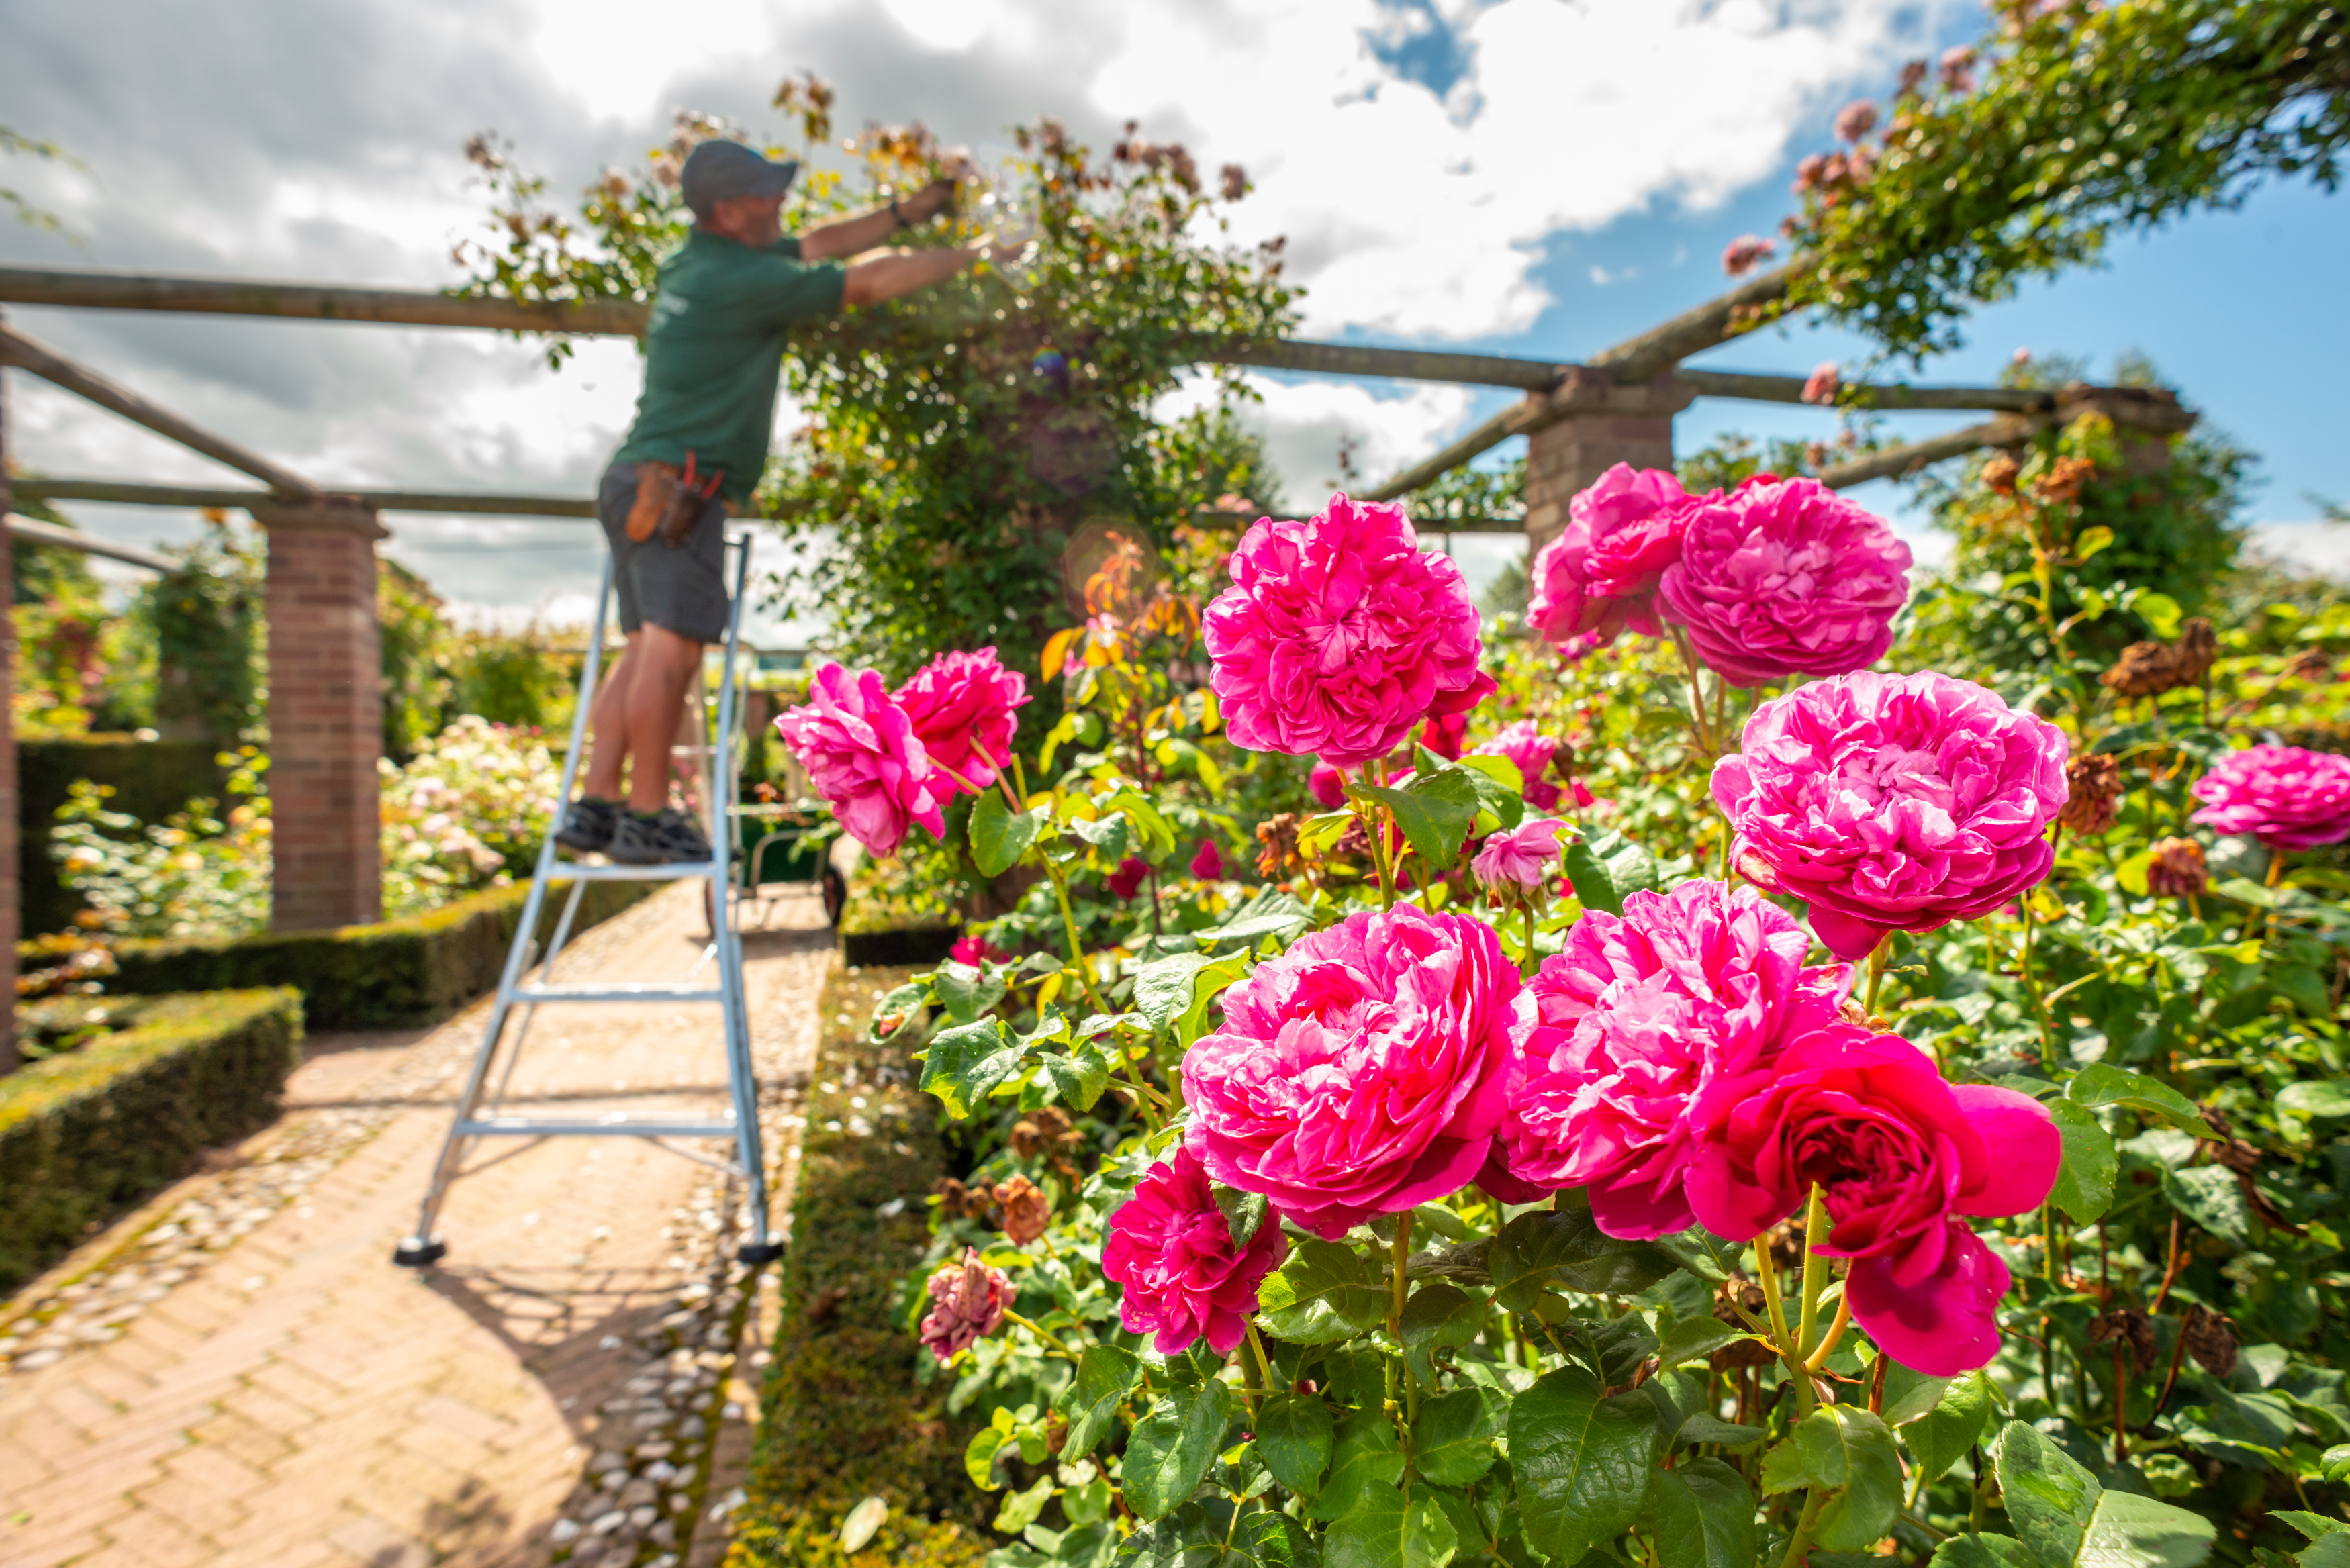 How To Prune Roses In The UK with David Austin Roses